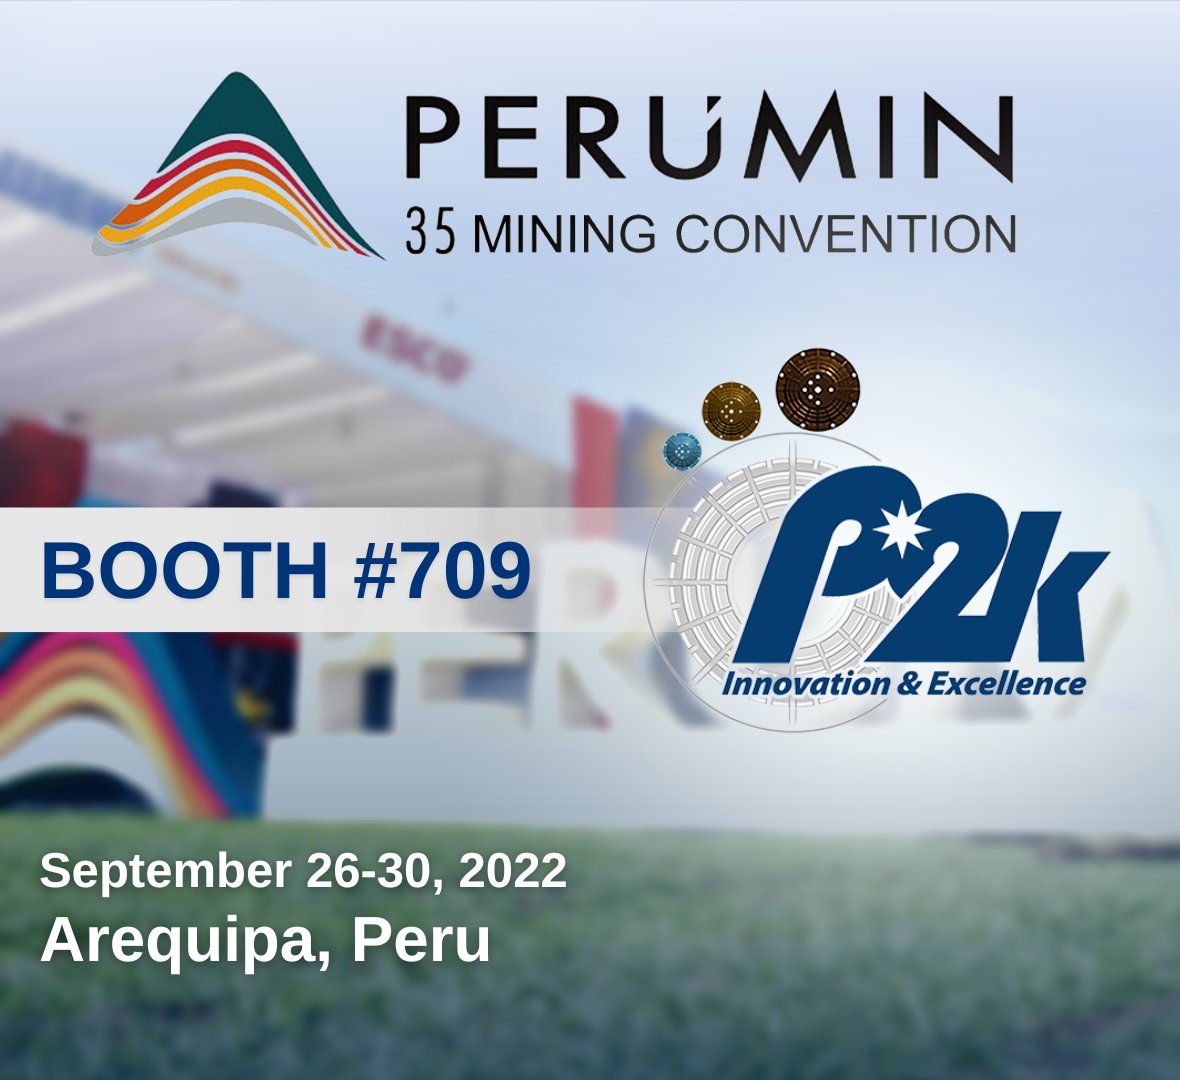 This week we are exhibiting at the PERUMIN 35 2022 mining show in Arequipa, Peru! If you are attending, stop by our booth #824
#PERUMIN35 https://t.co/LlvoWTu71Z